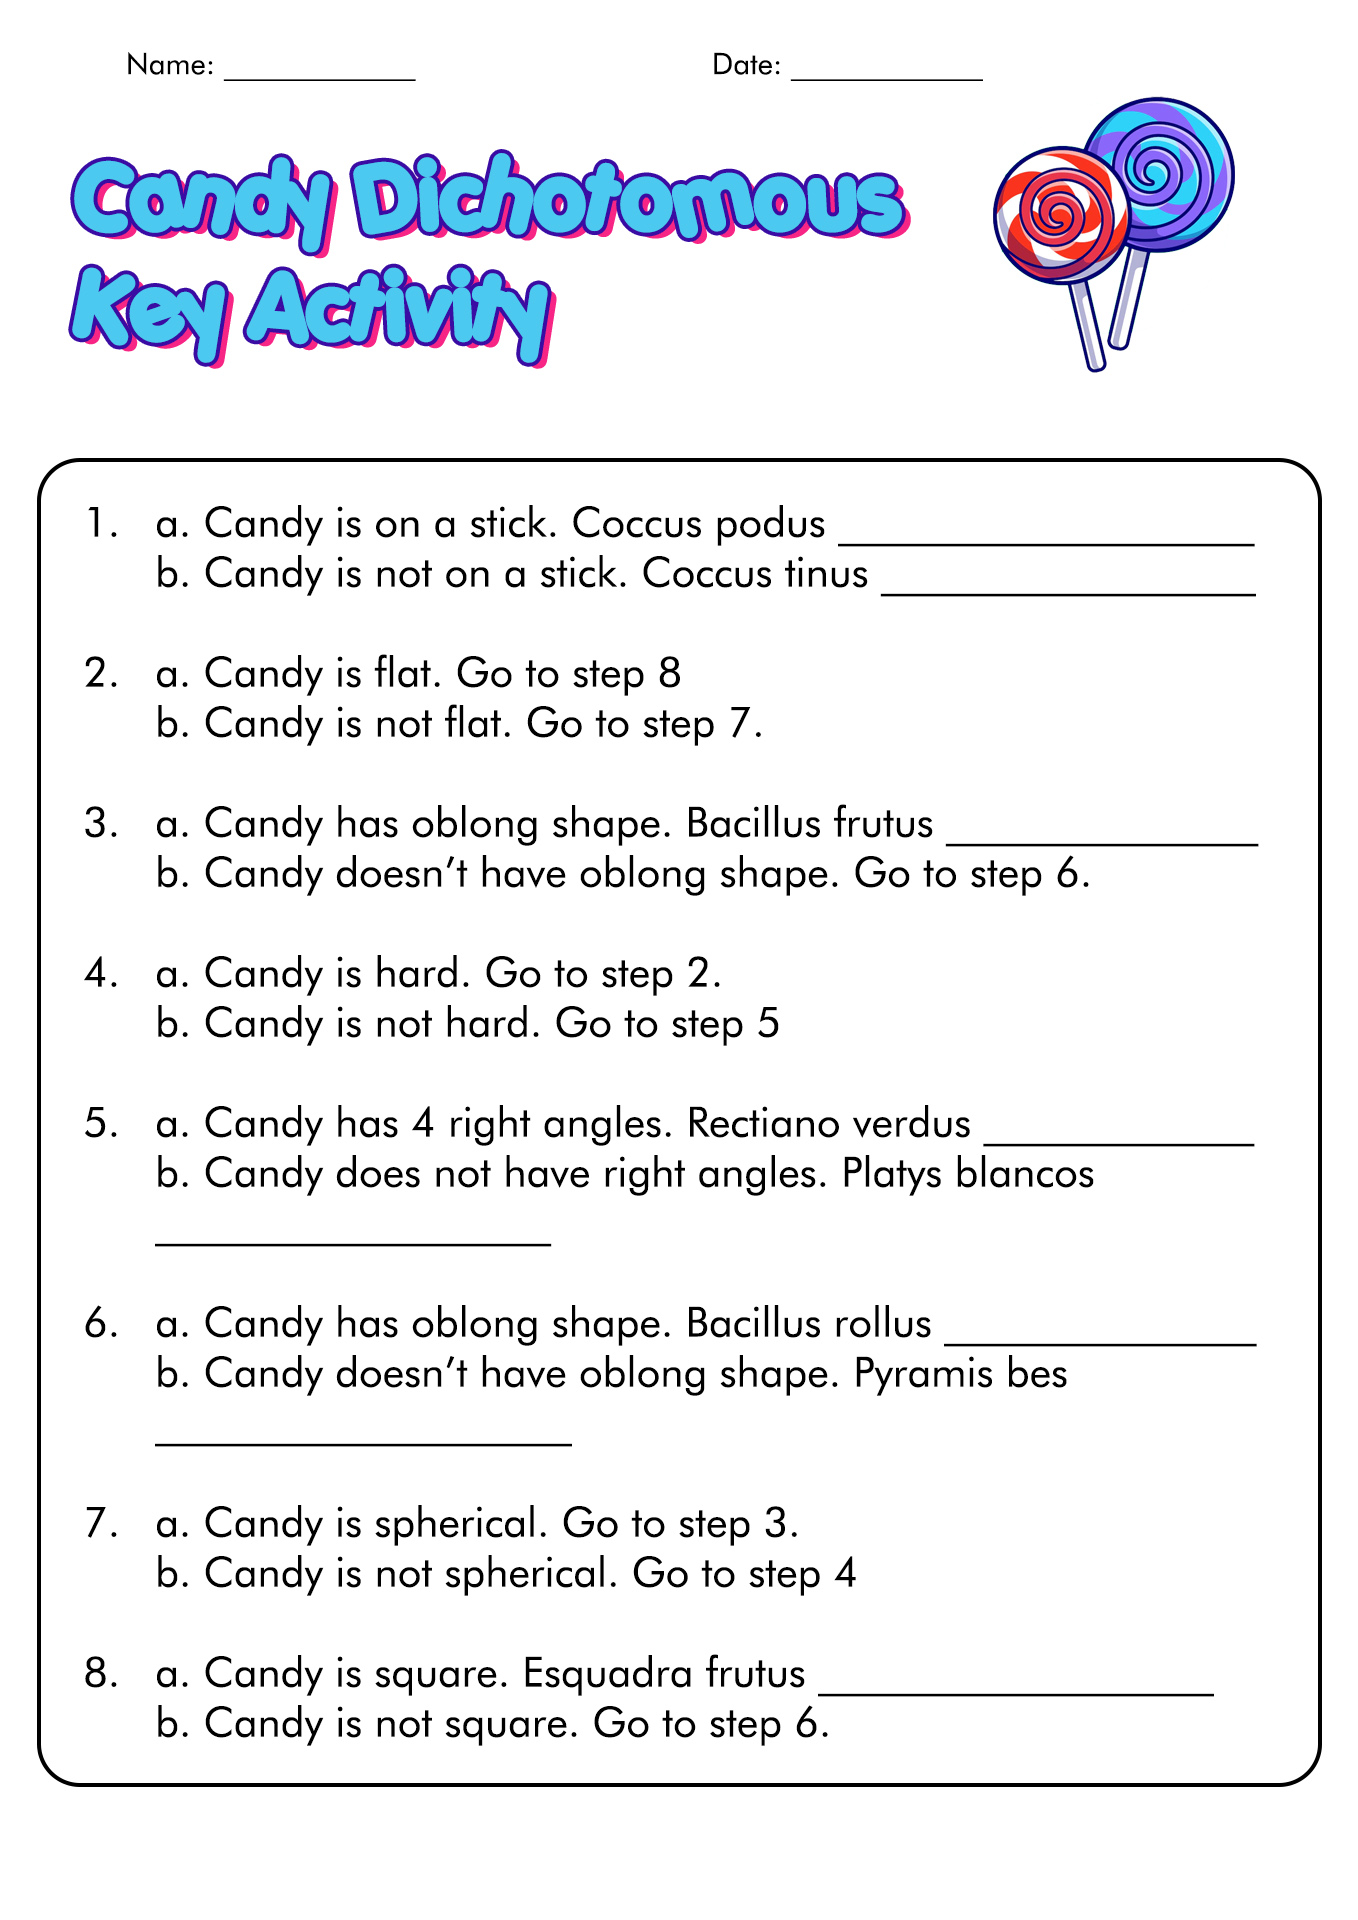 Candy Dichotomous Key Examples Image